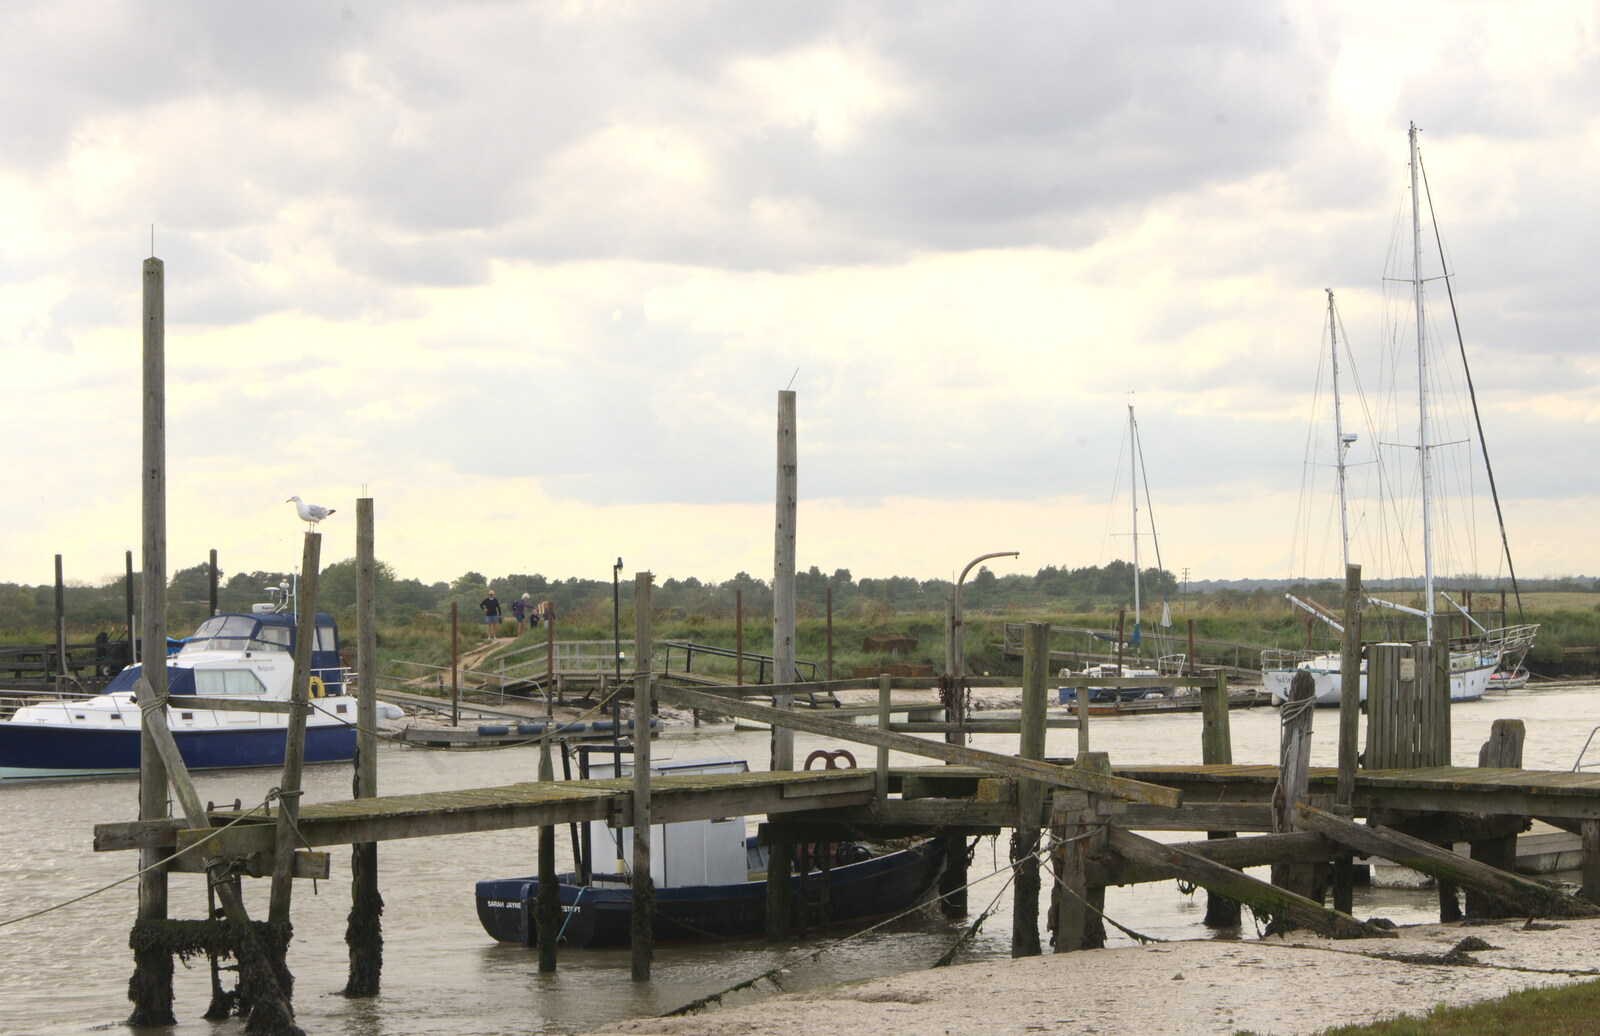 The River Blyth from The Danger of Trees: A Camping (Mis)adventure - Southwold, Suffolk - 3rd August 2015